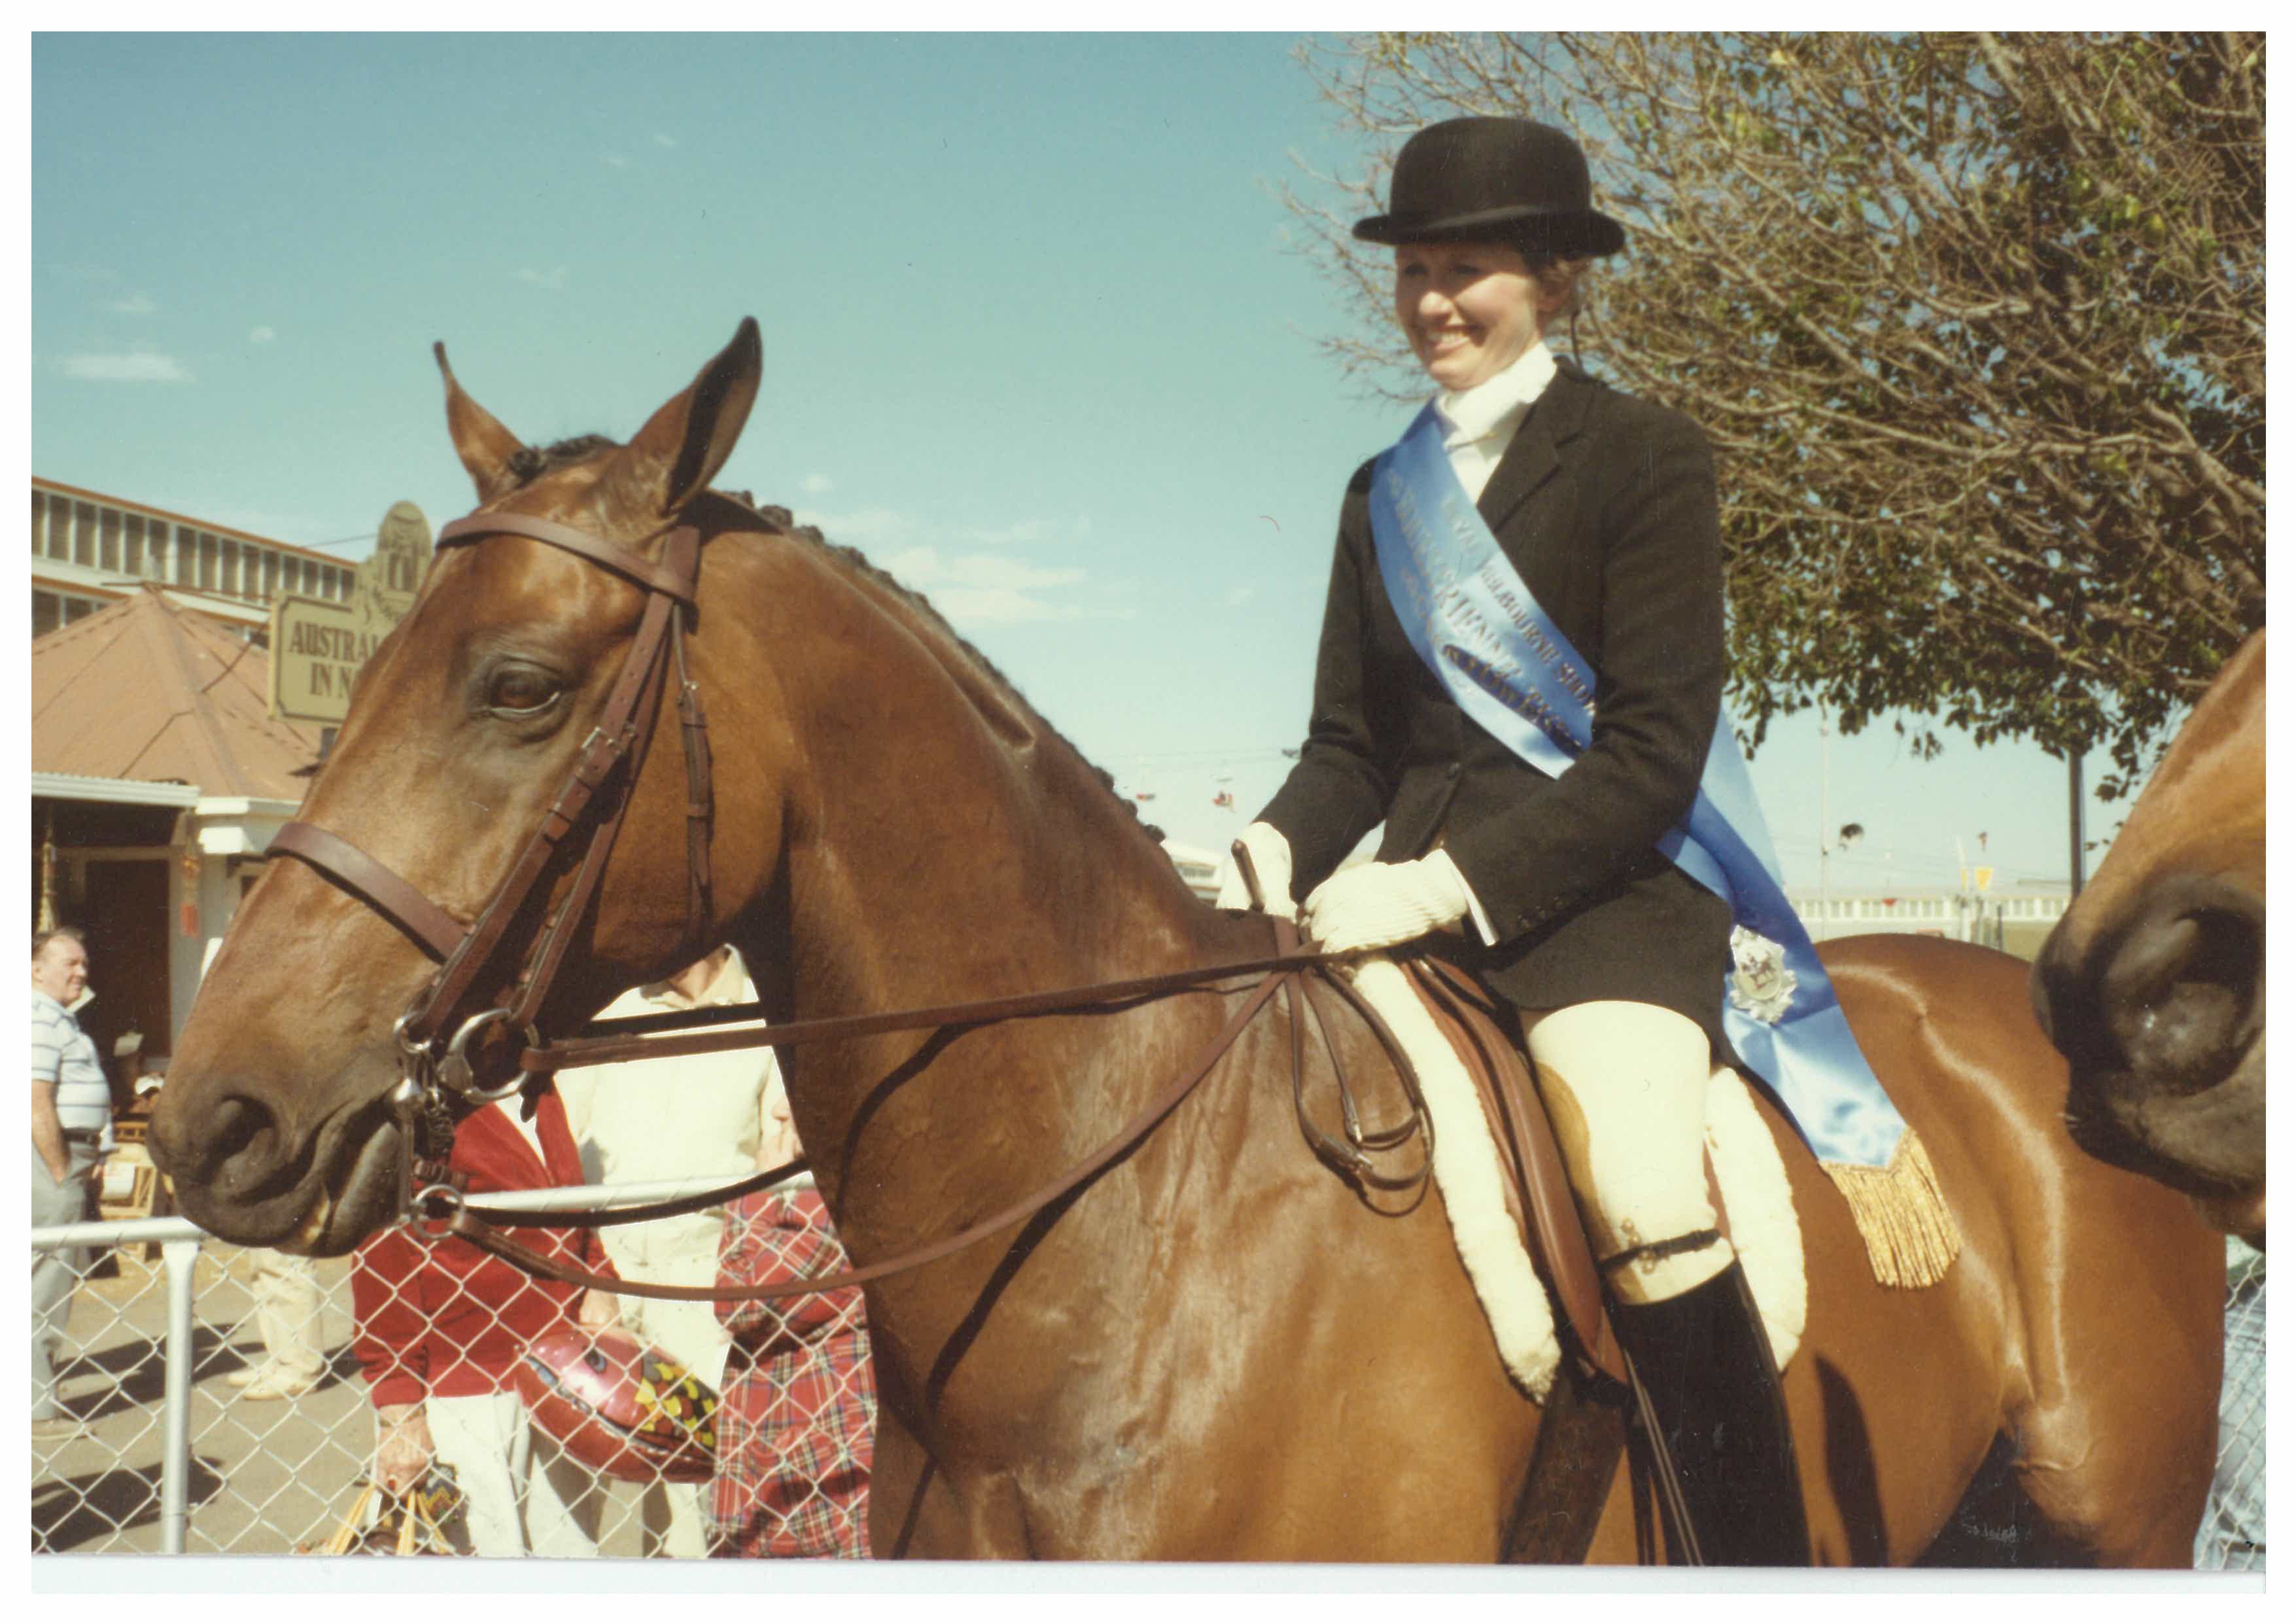 Helen Heagney after winning the 1985 Garryowen Equestrienne Turnout. Image Source: Melbourne Royal Heritage Collection.